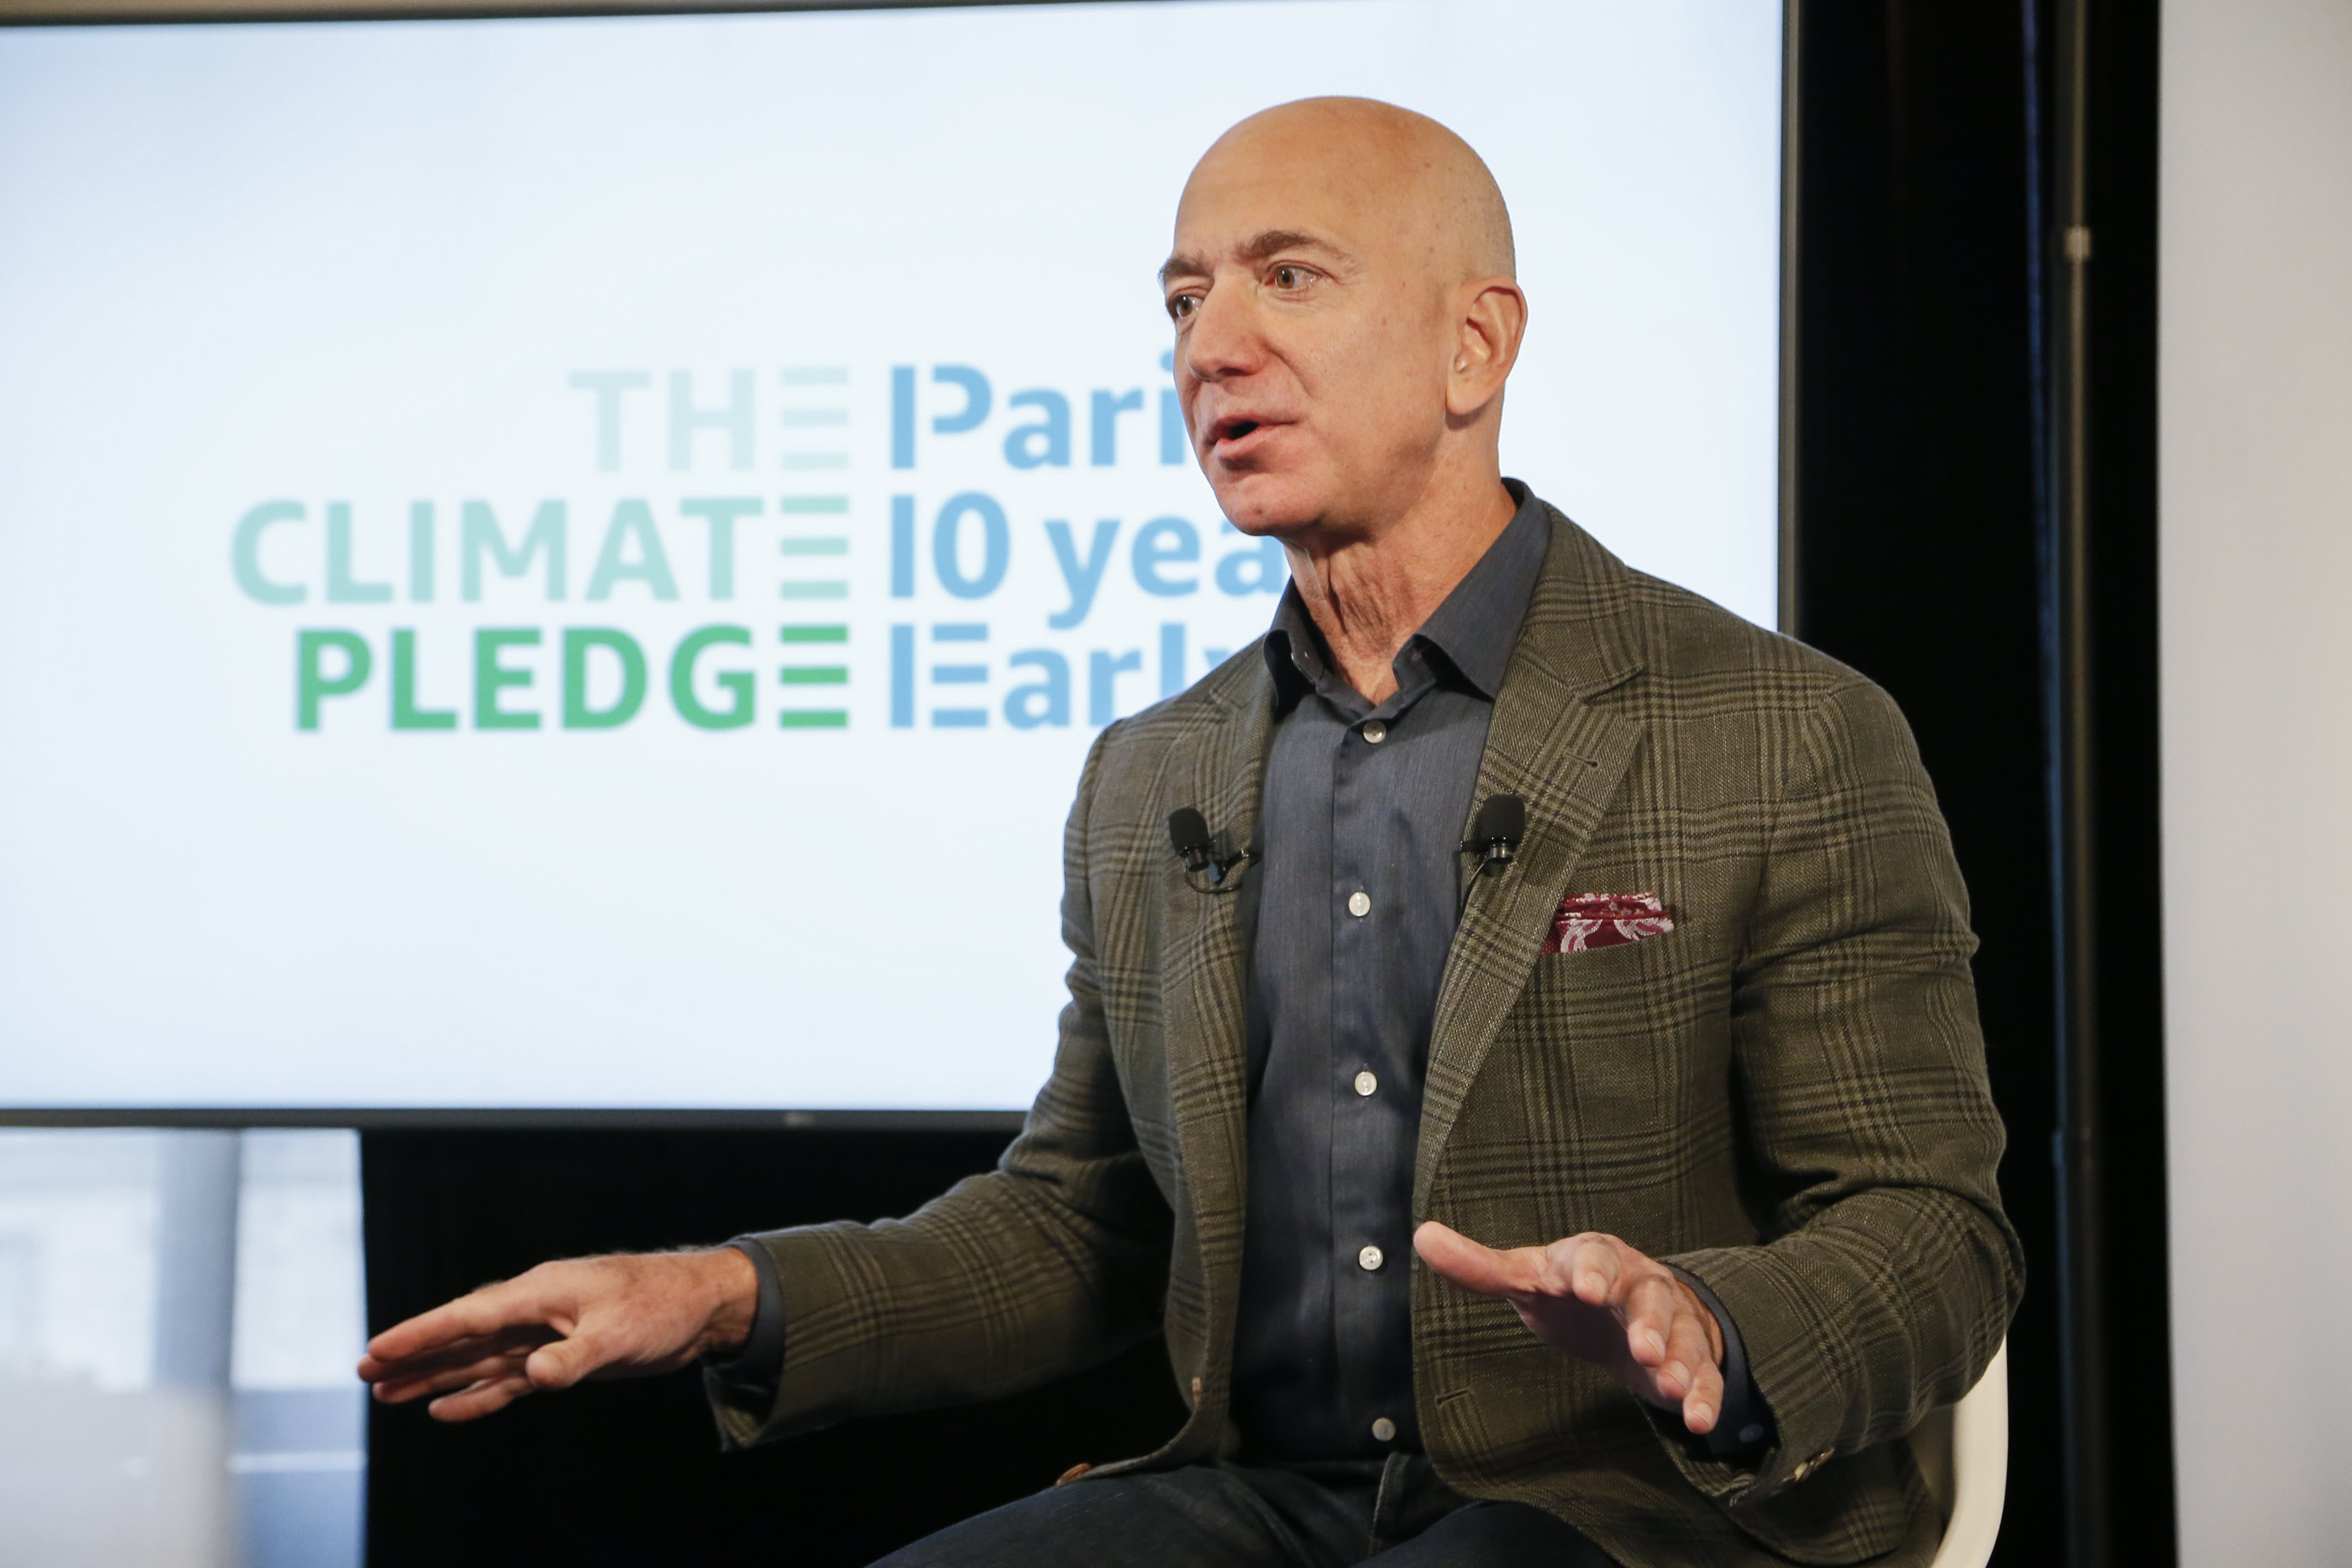 IBM is one of 20 companies joining Amazon in Jeff Bezos’ Climate Pledge